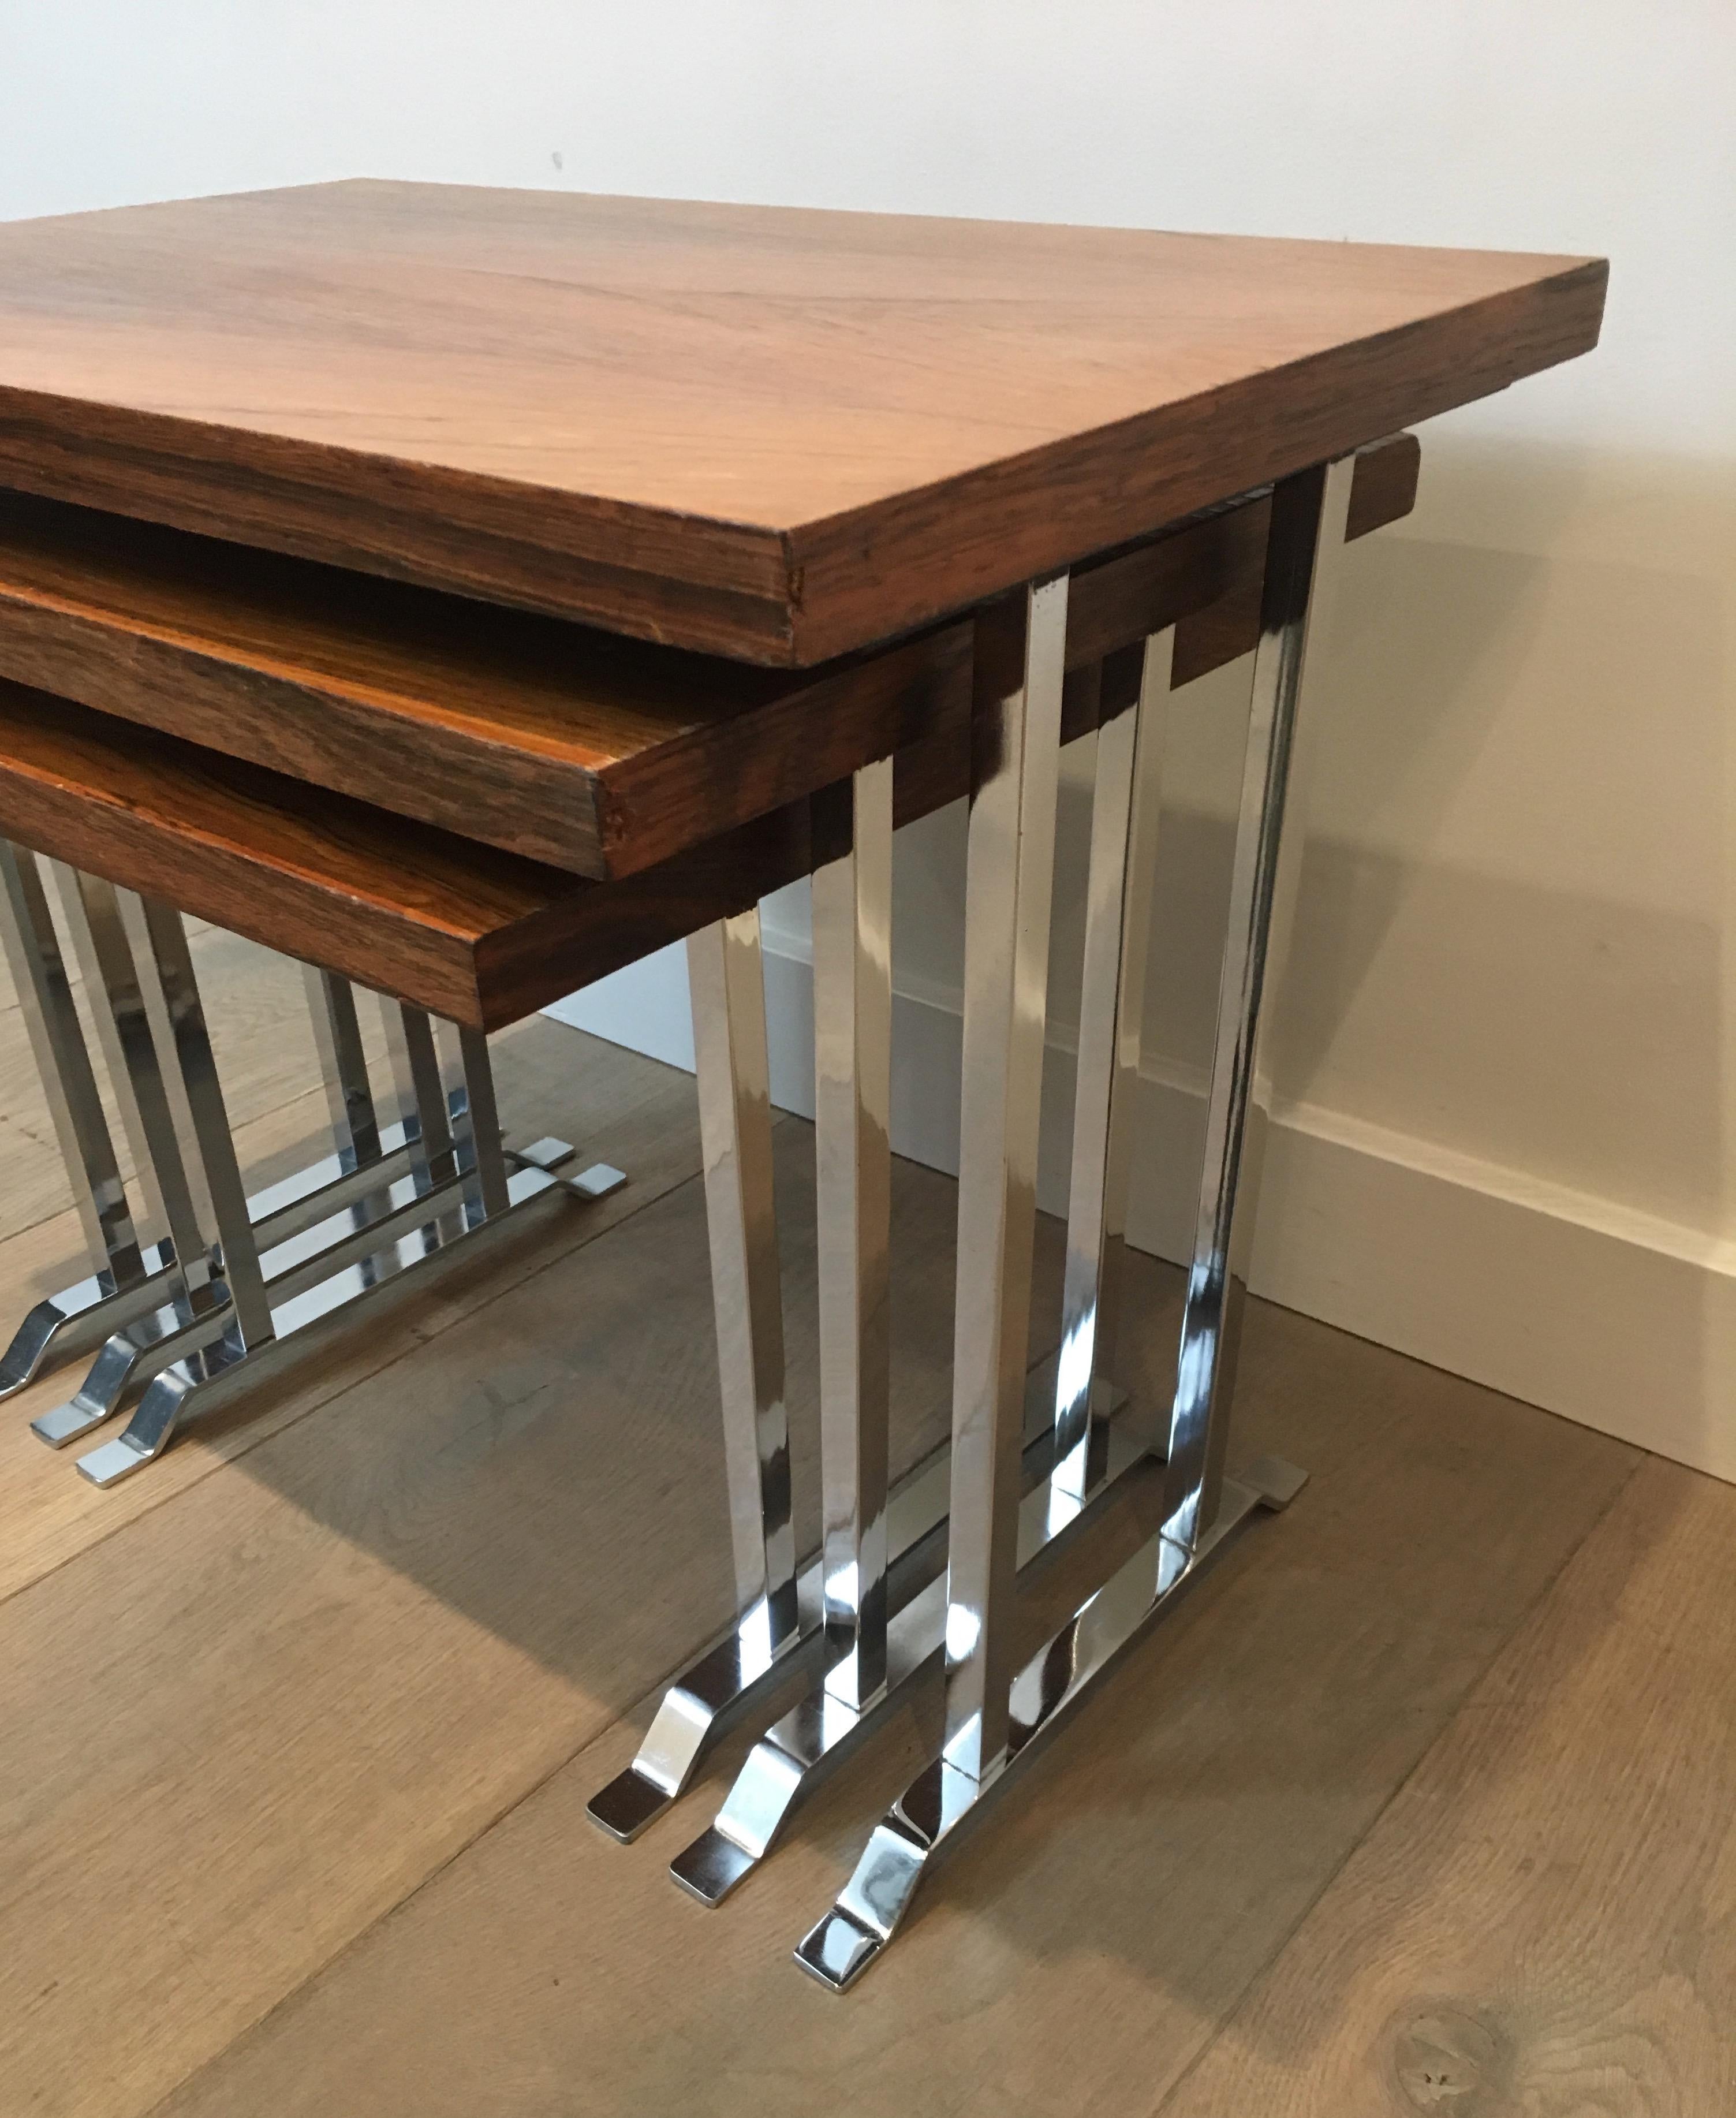 Set of 3 Exotic Wood and Chrome Nesting Tables, French, circa 1970 For Sale 2